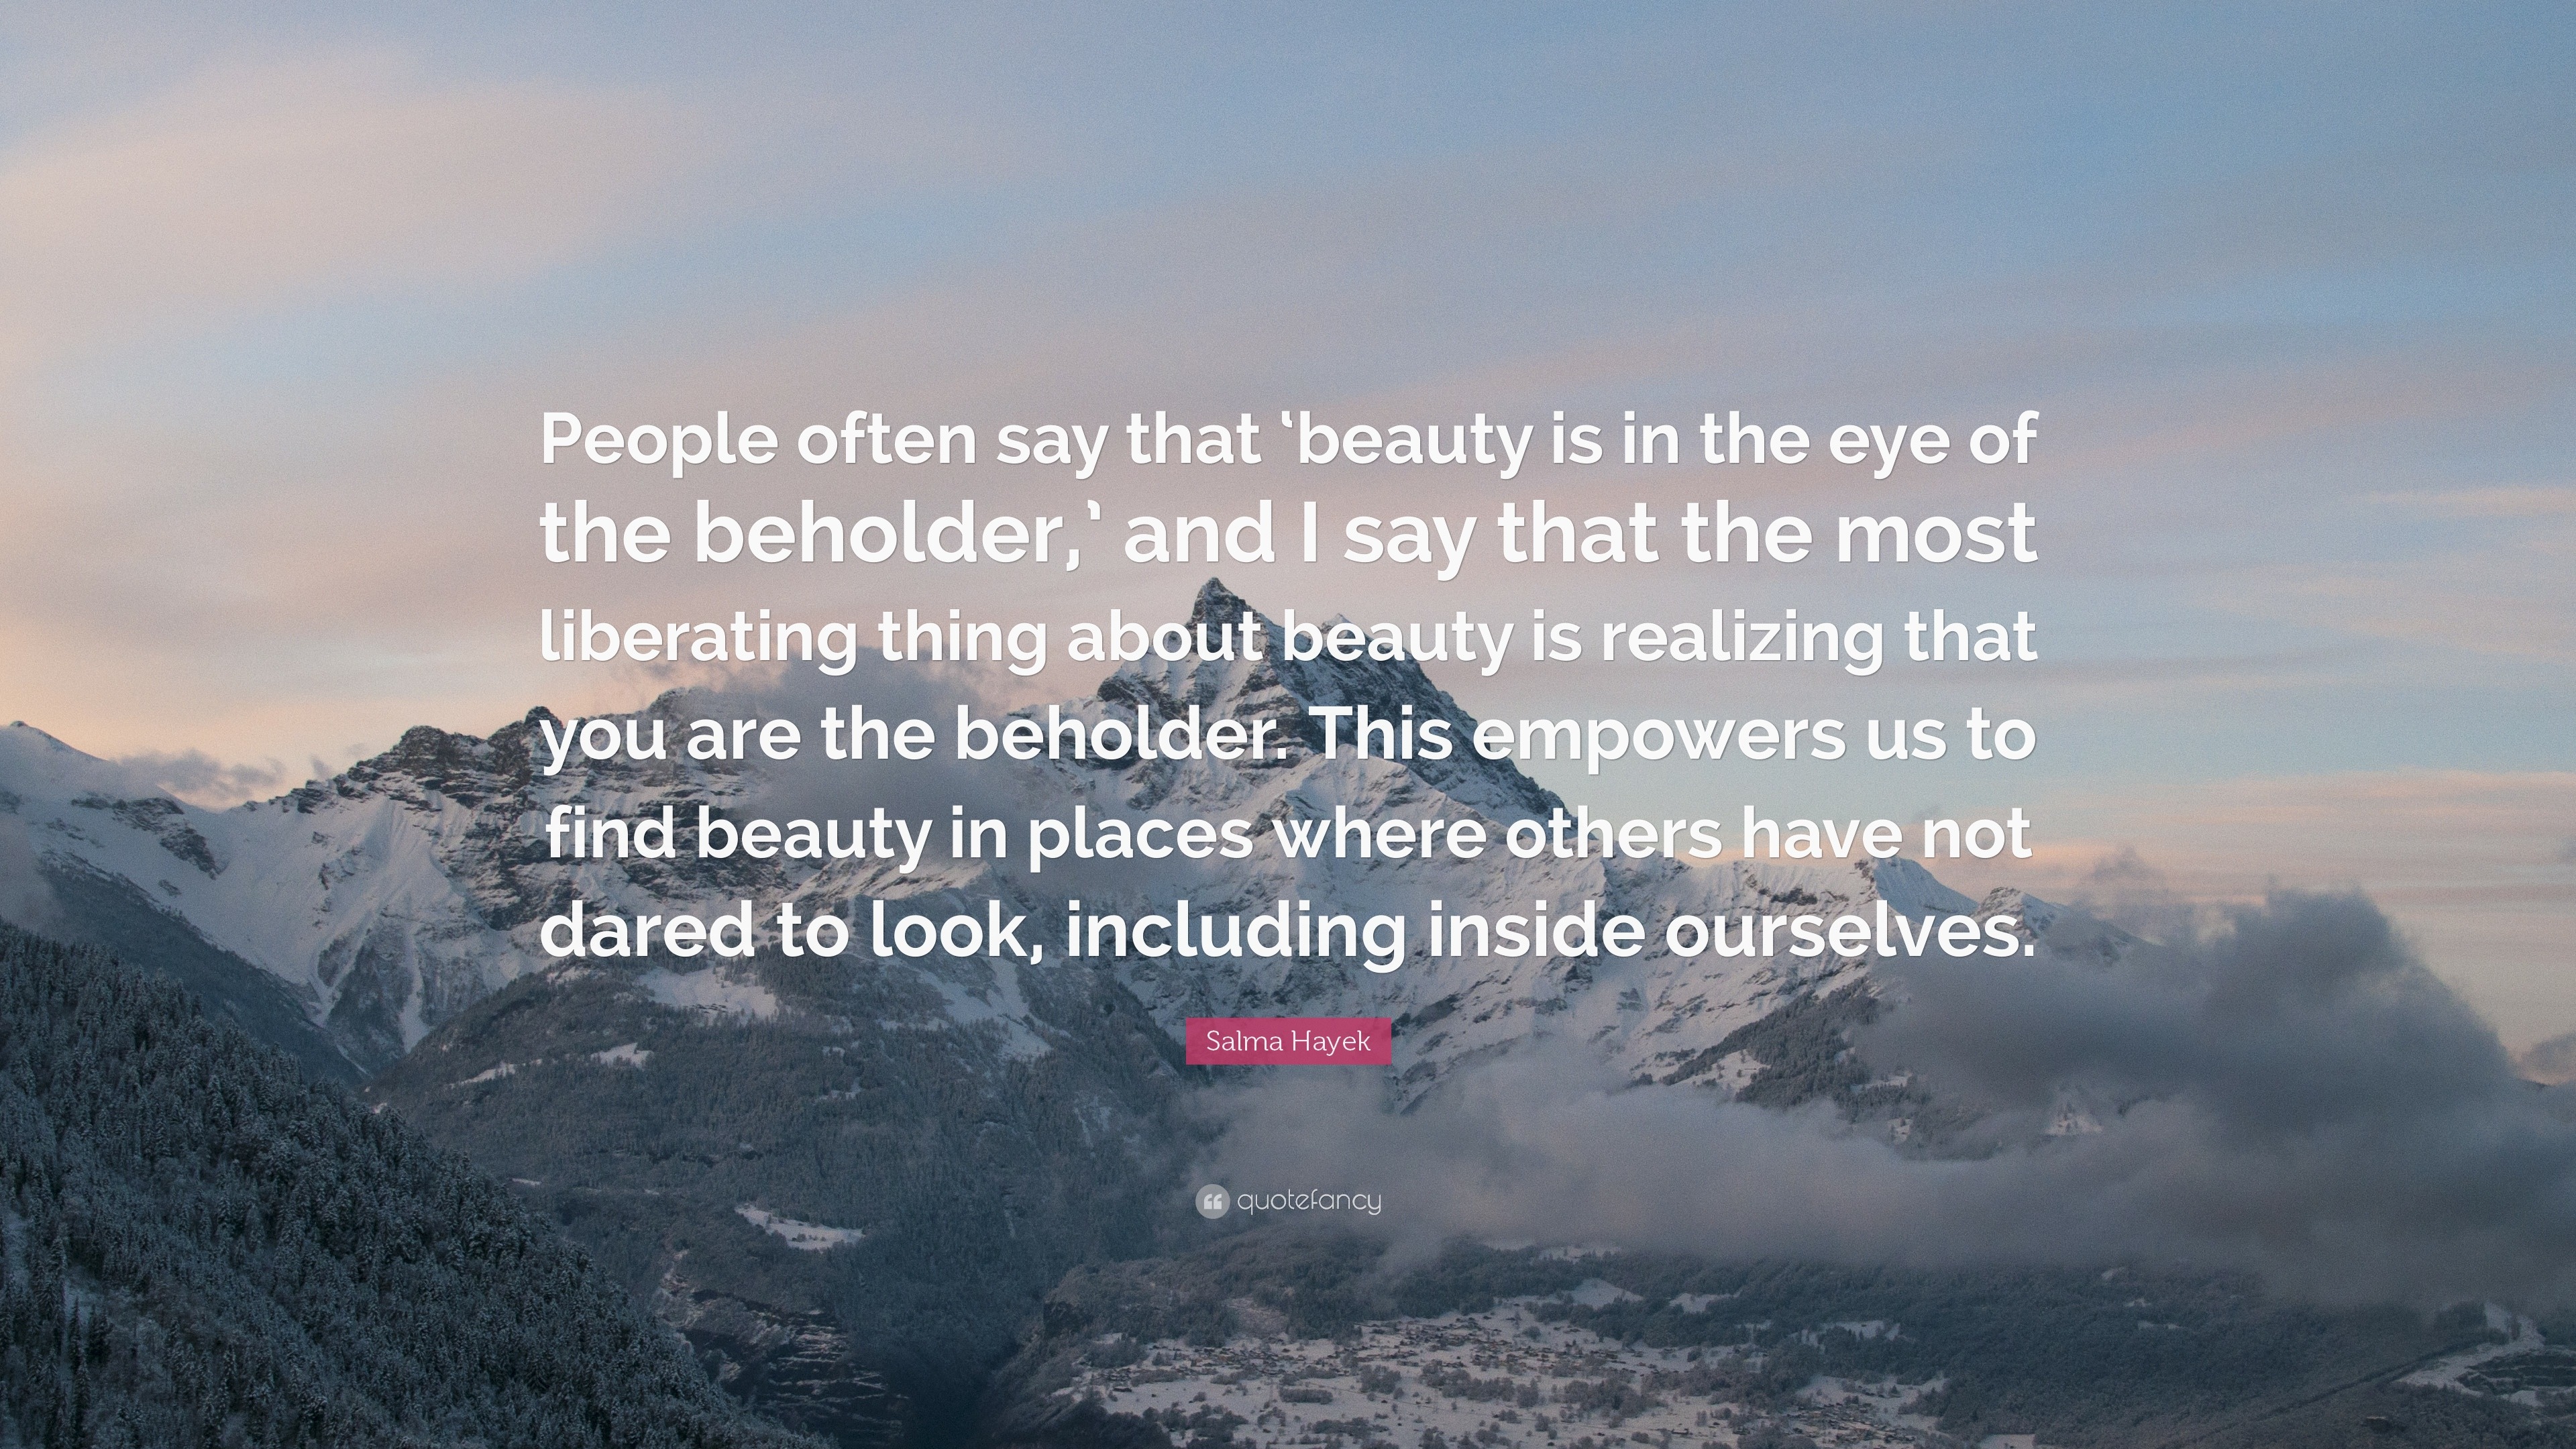 Salma Hayek Quote: "People often say that 'beauty is in the eye of the beholder,' and I say that ...